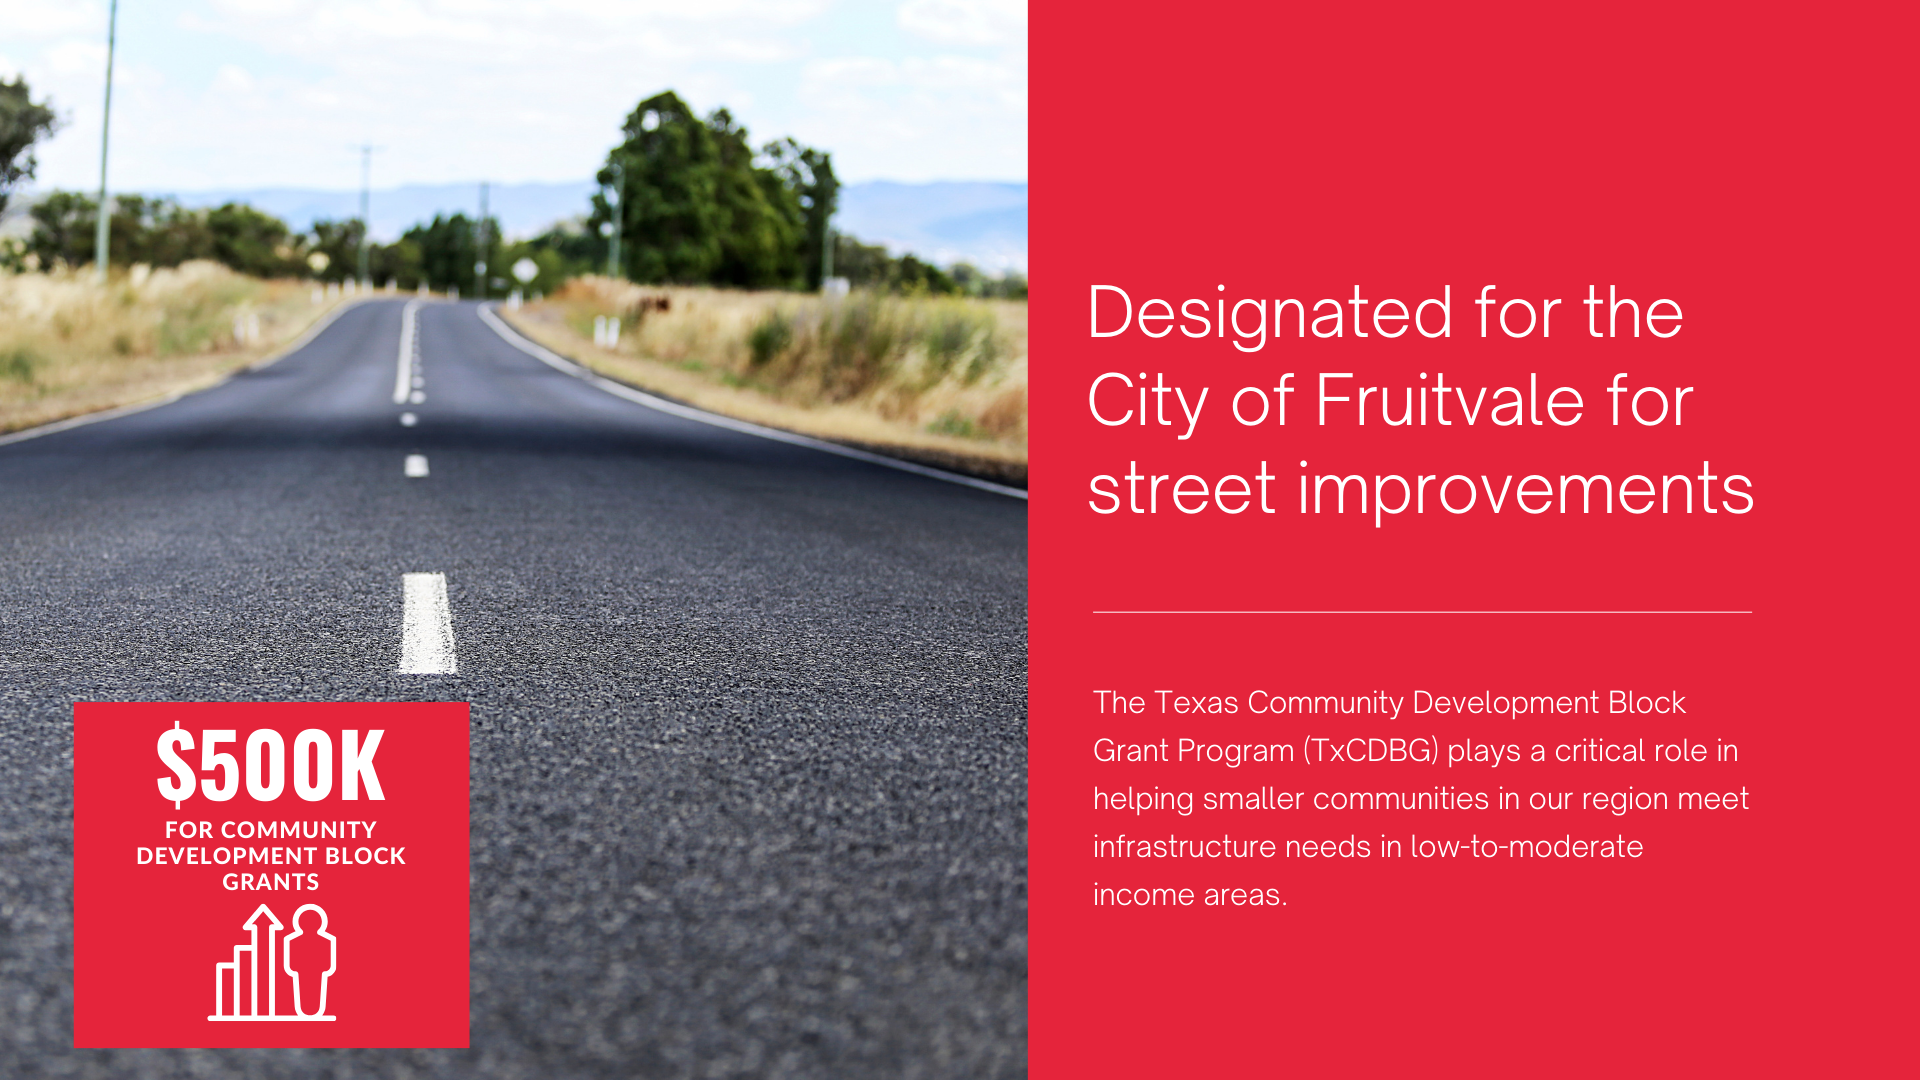 An advertisement for the city of fruitvale for street improvements